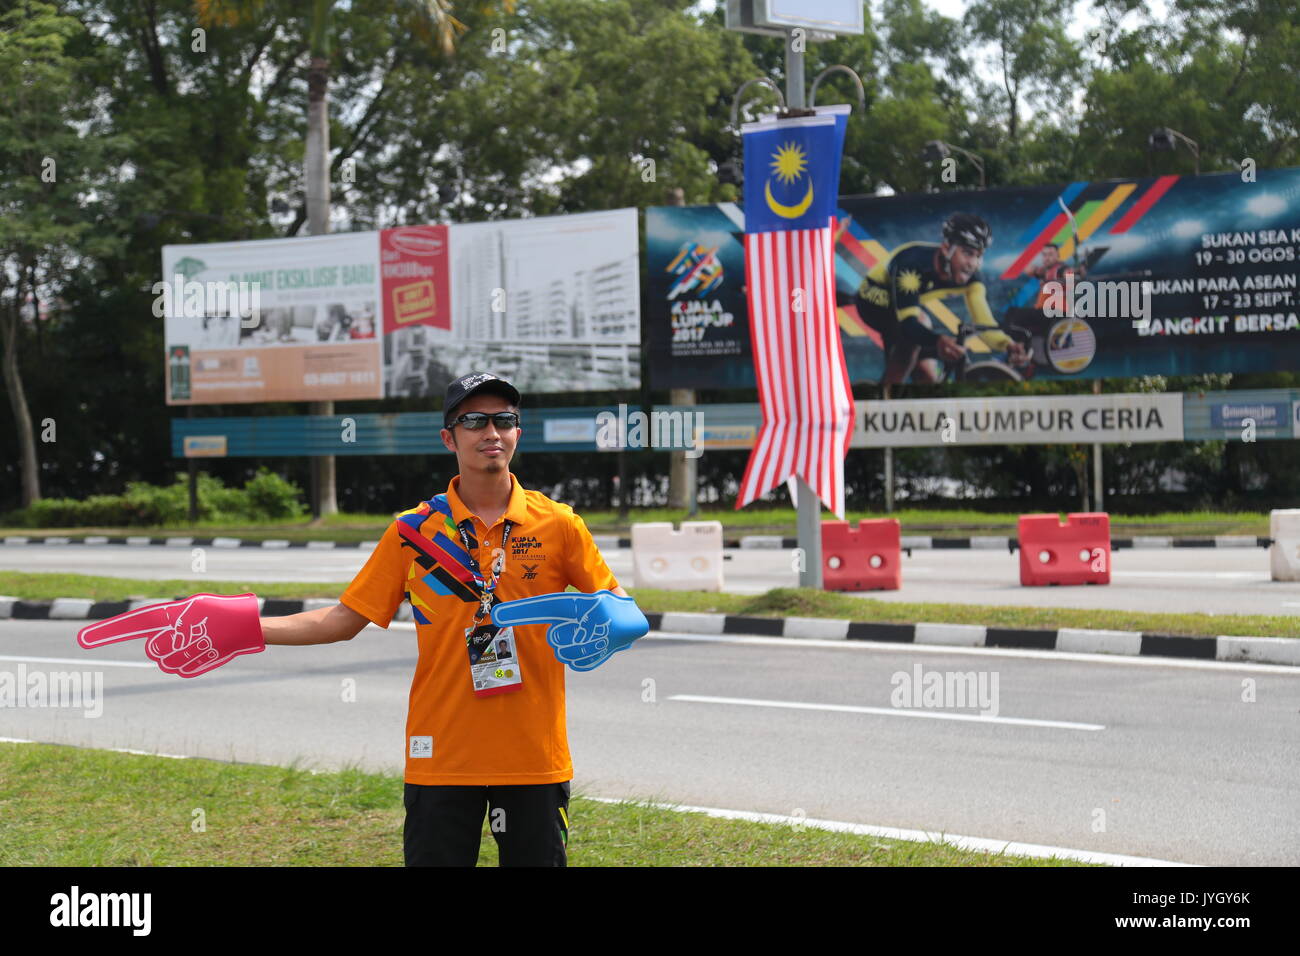 Kuala Lumpur, Malaysia. 19th August, 2017. Young volunteer giving direction to stadium hosting the opening ceremony of 29th SEA games. Credit: Calvin Chan/Alamy Live News Stock Photo